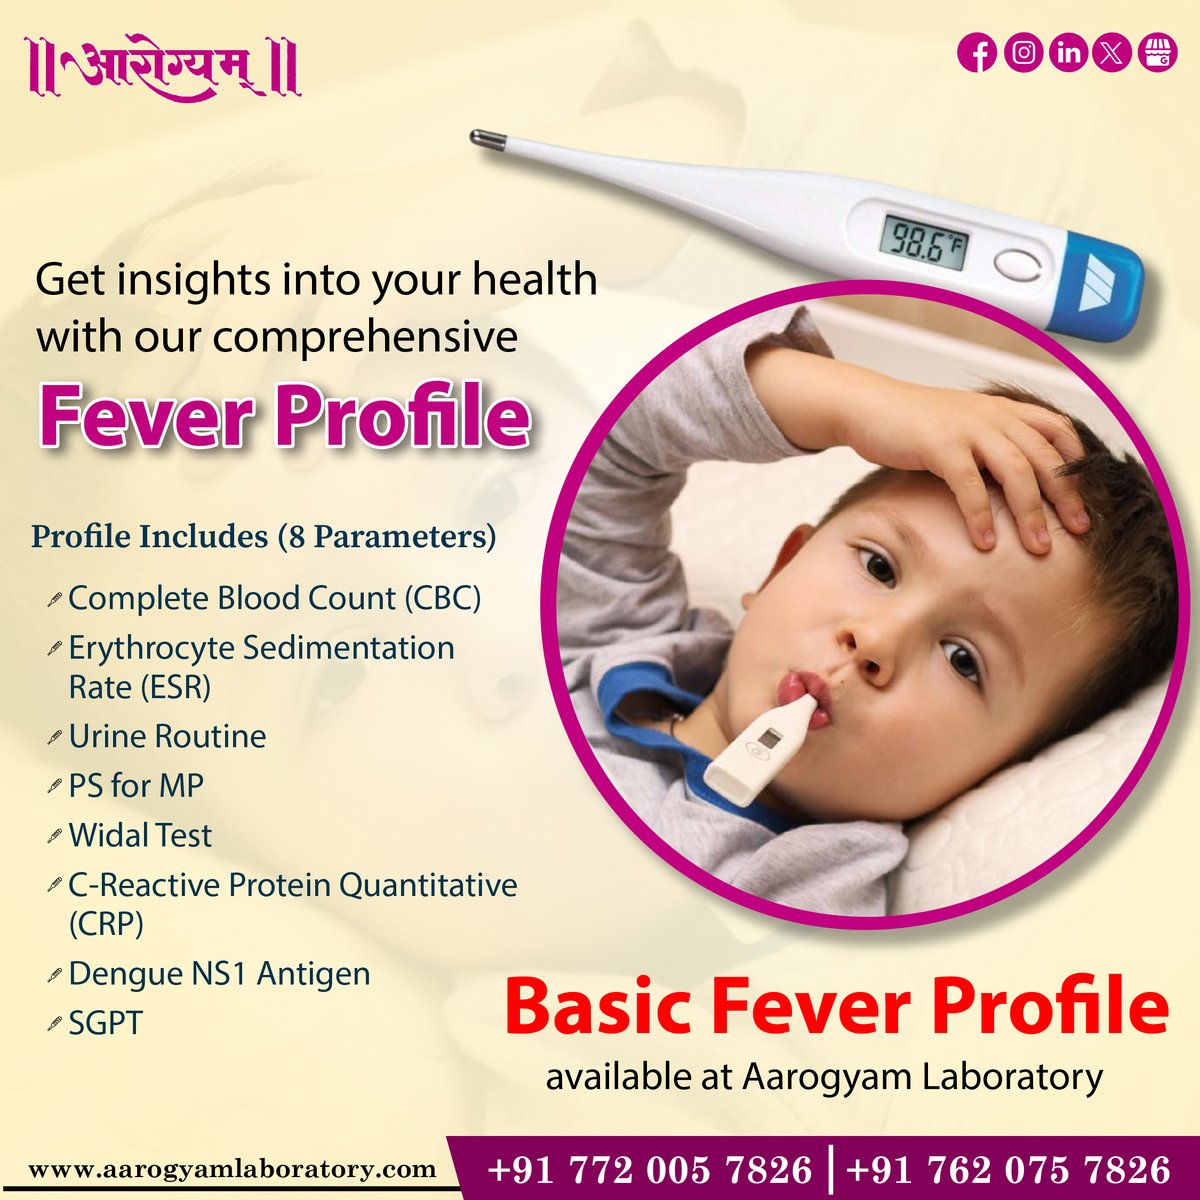 Take charge of your health narrative. Discover the cause with our advanced Fever Profile.

#aarogyam #health #healthylife #labtest #FeverProfile #FeverTests #FeverDiagnosis #TemperatureCheck #FebrileIllness #FeverSymptoms #FeverMonitoring #FeverManagement #BodyTemperature